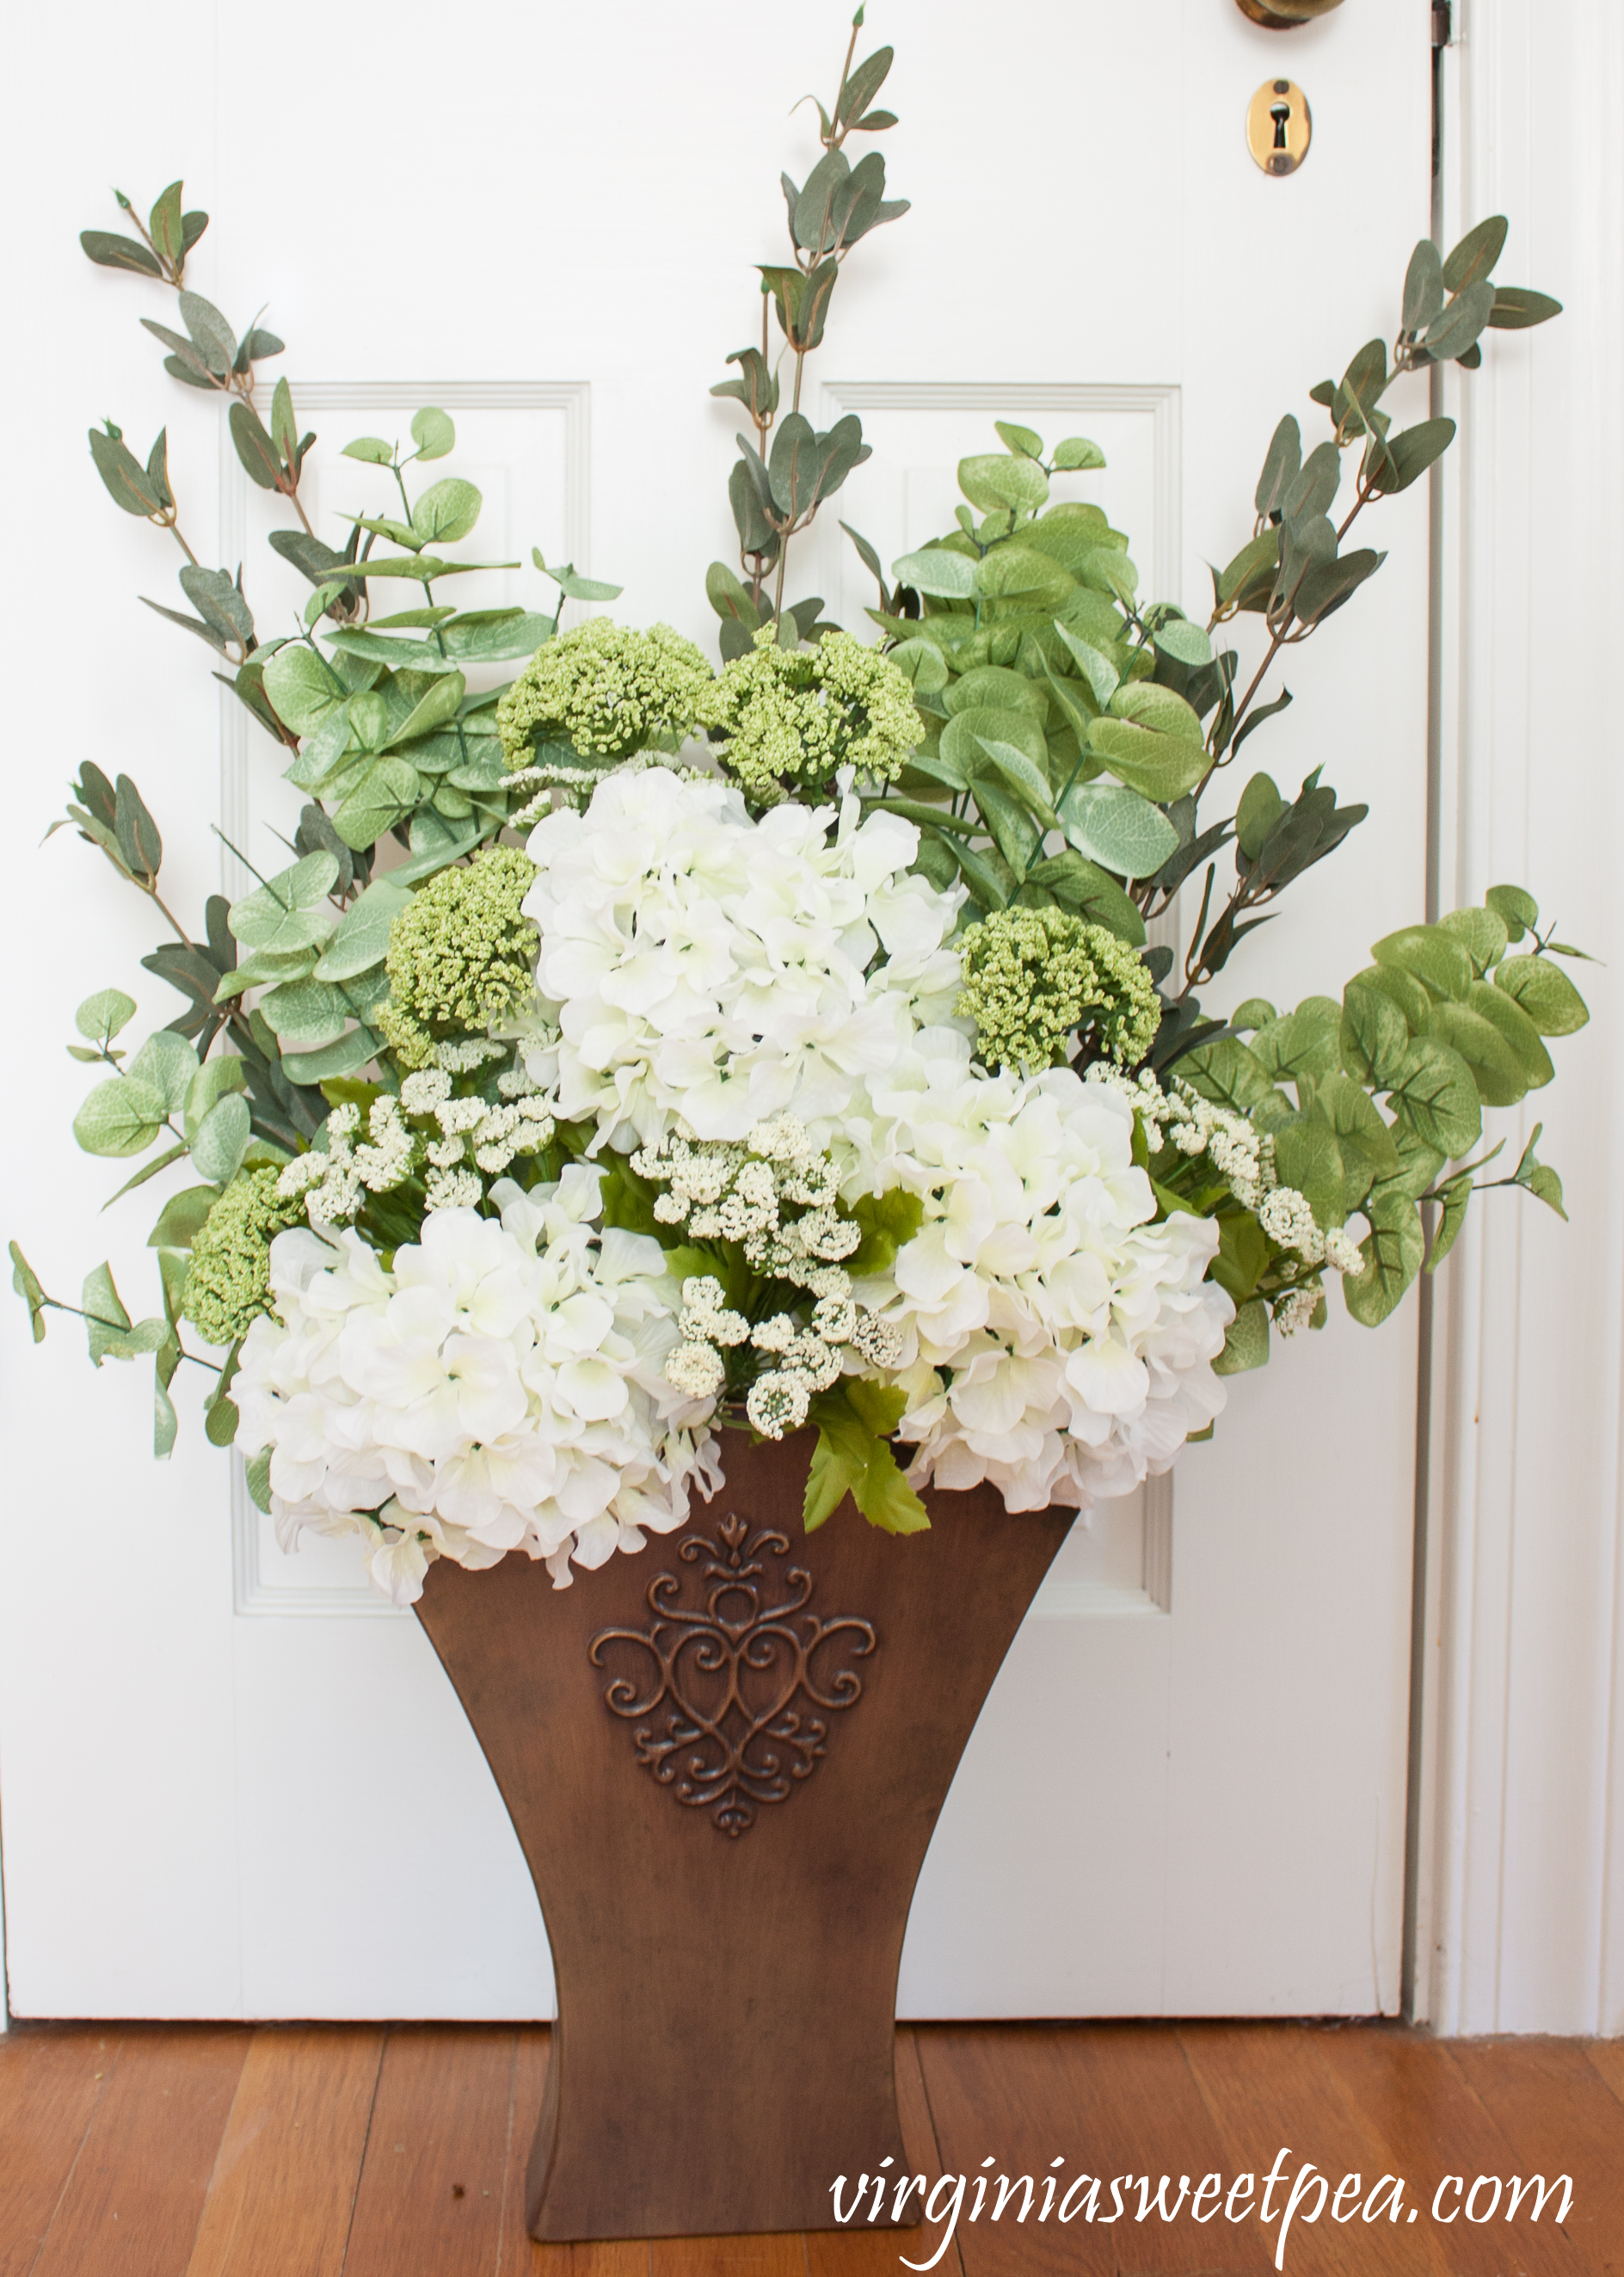 DIY Spring Floral Display - Learn how to make a floral display like this to display in your home. This would look great hanging on a door or on a porch wall. #springdecor #springfloralarrangement #springwreath #springdecorating